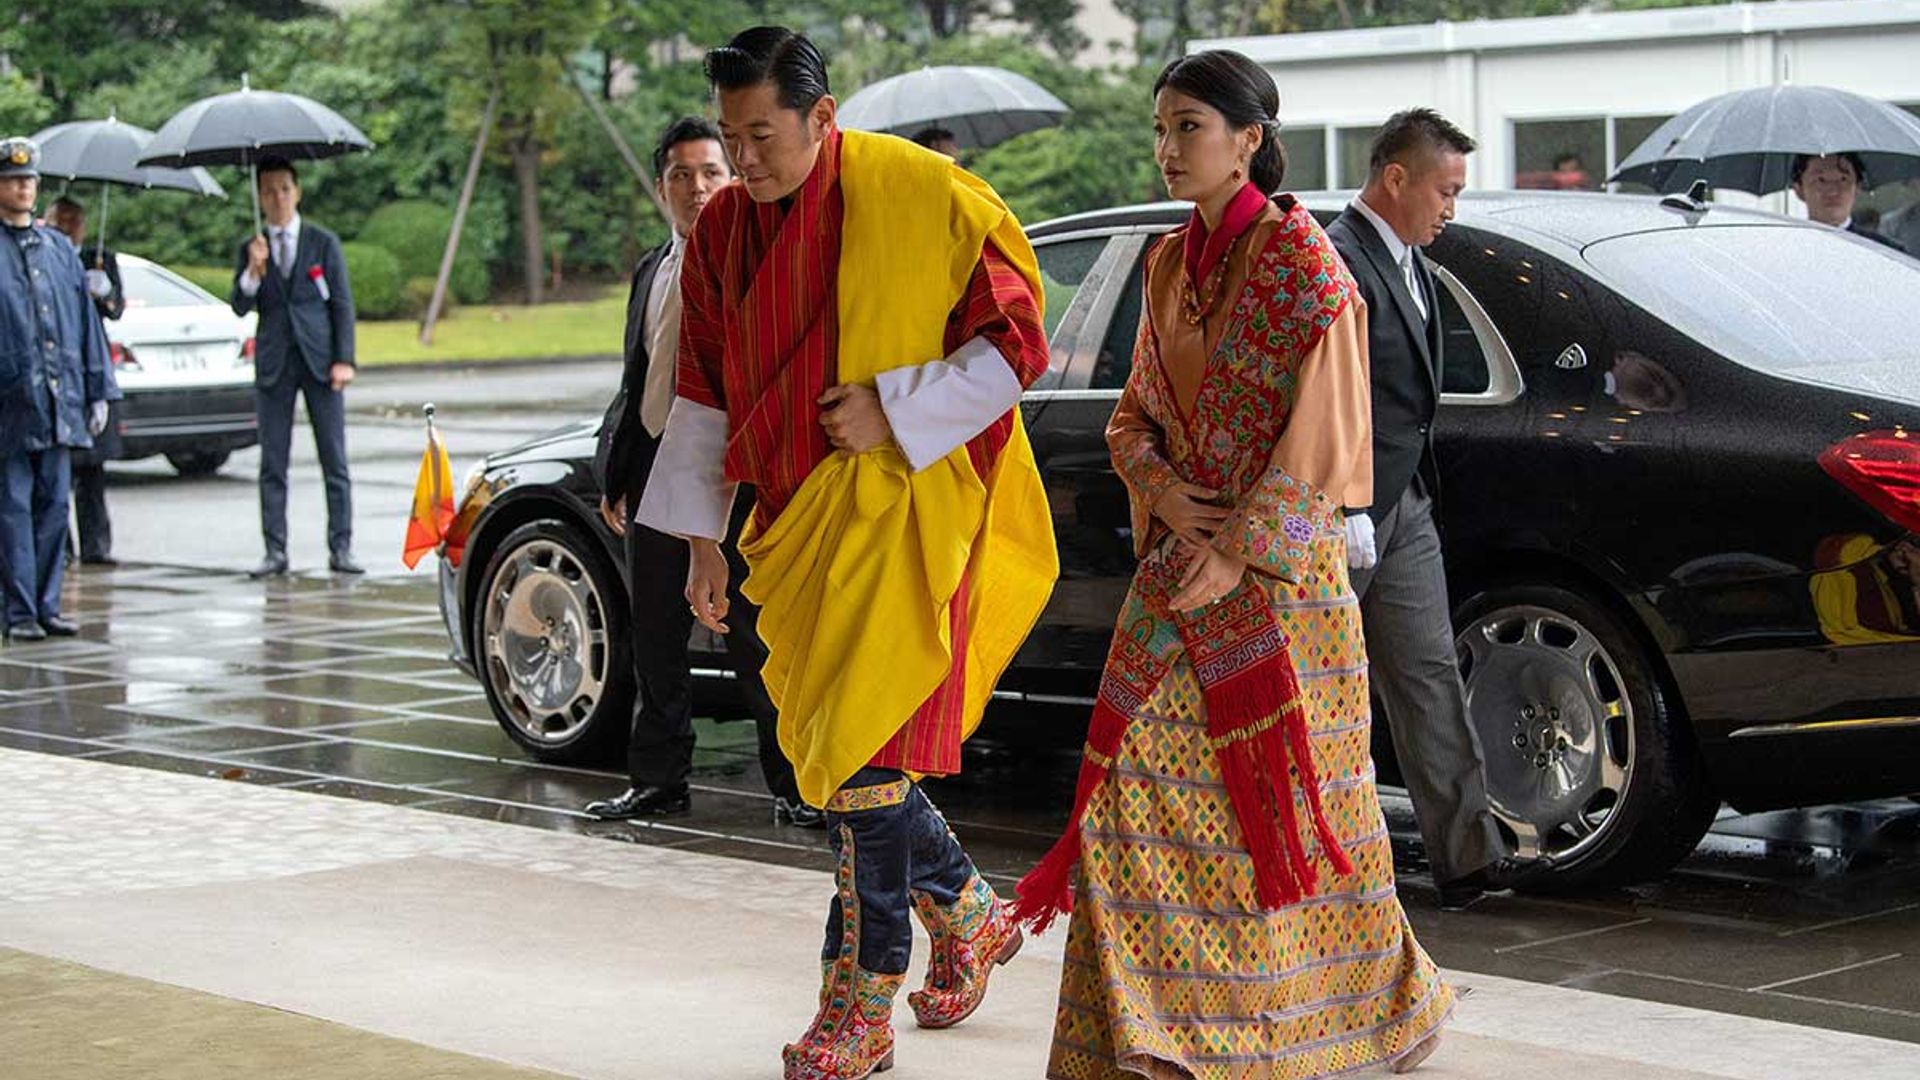 Royal baby: King Jigme Khesar and Queen Jetsun Pema of Bhutan expecting second child